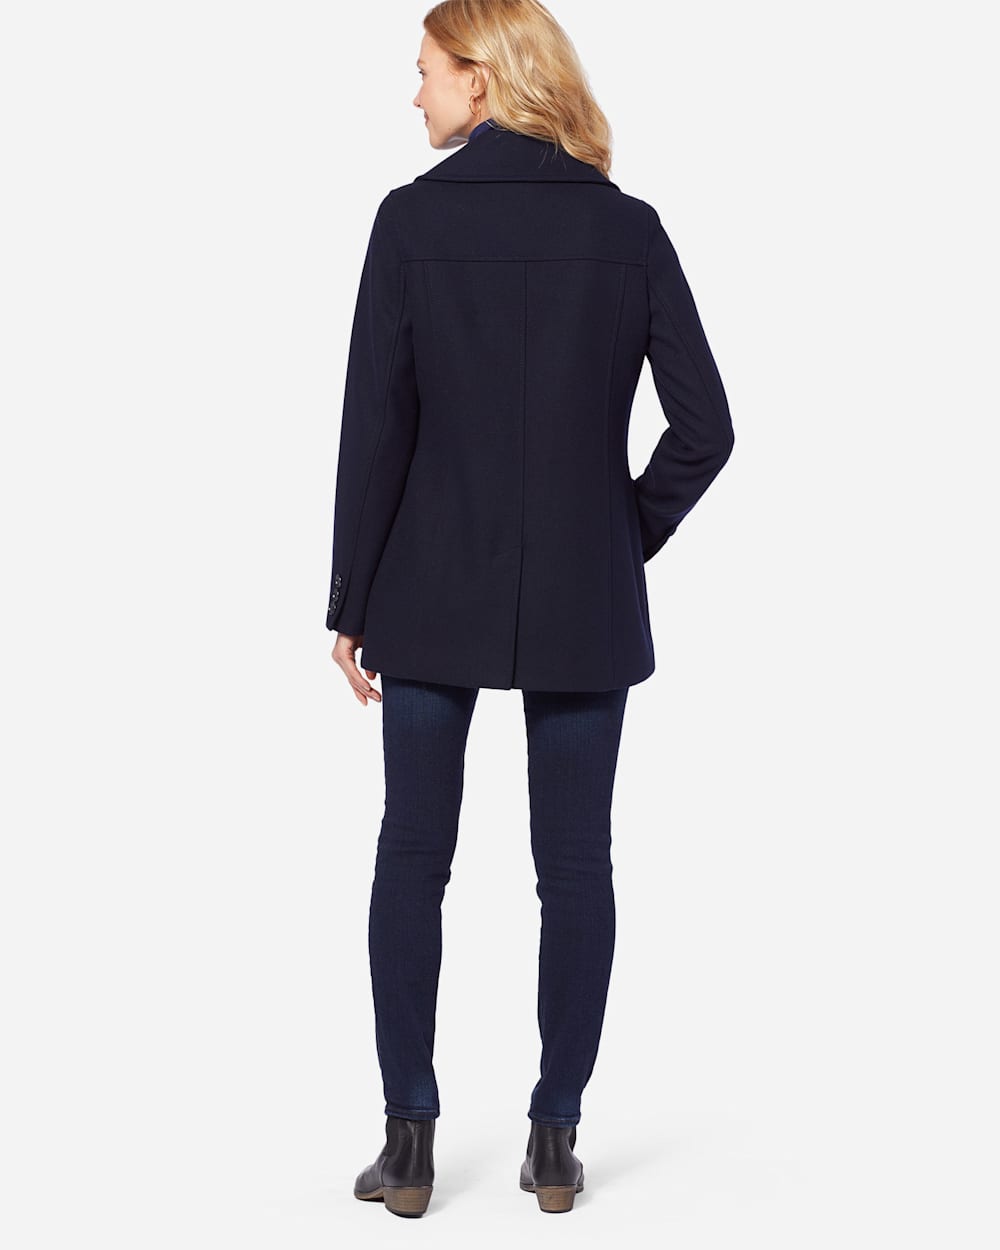 ADDITIONAL VIEW OF WOMEN'S WOOL PEA COAT IN NAVY image number 2